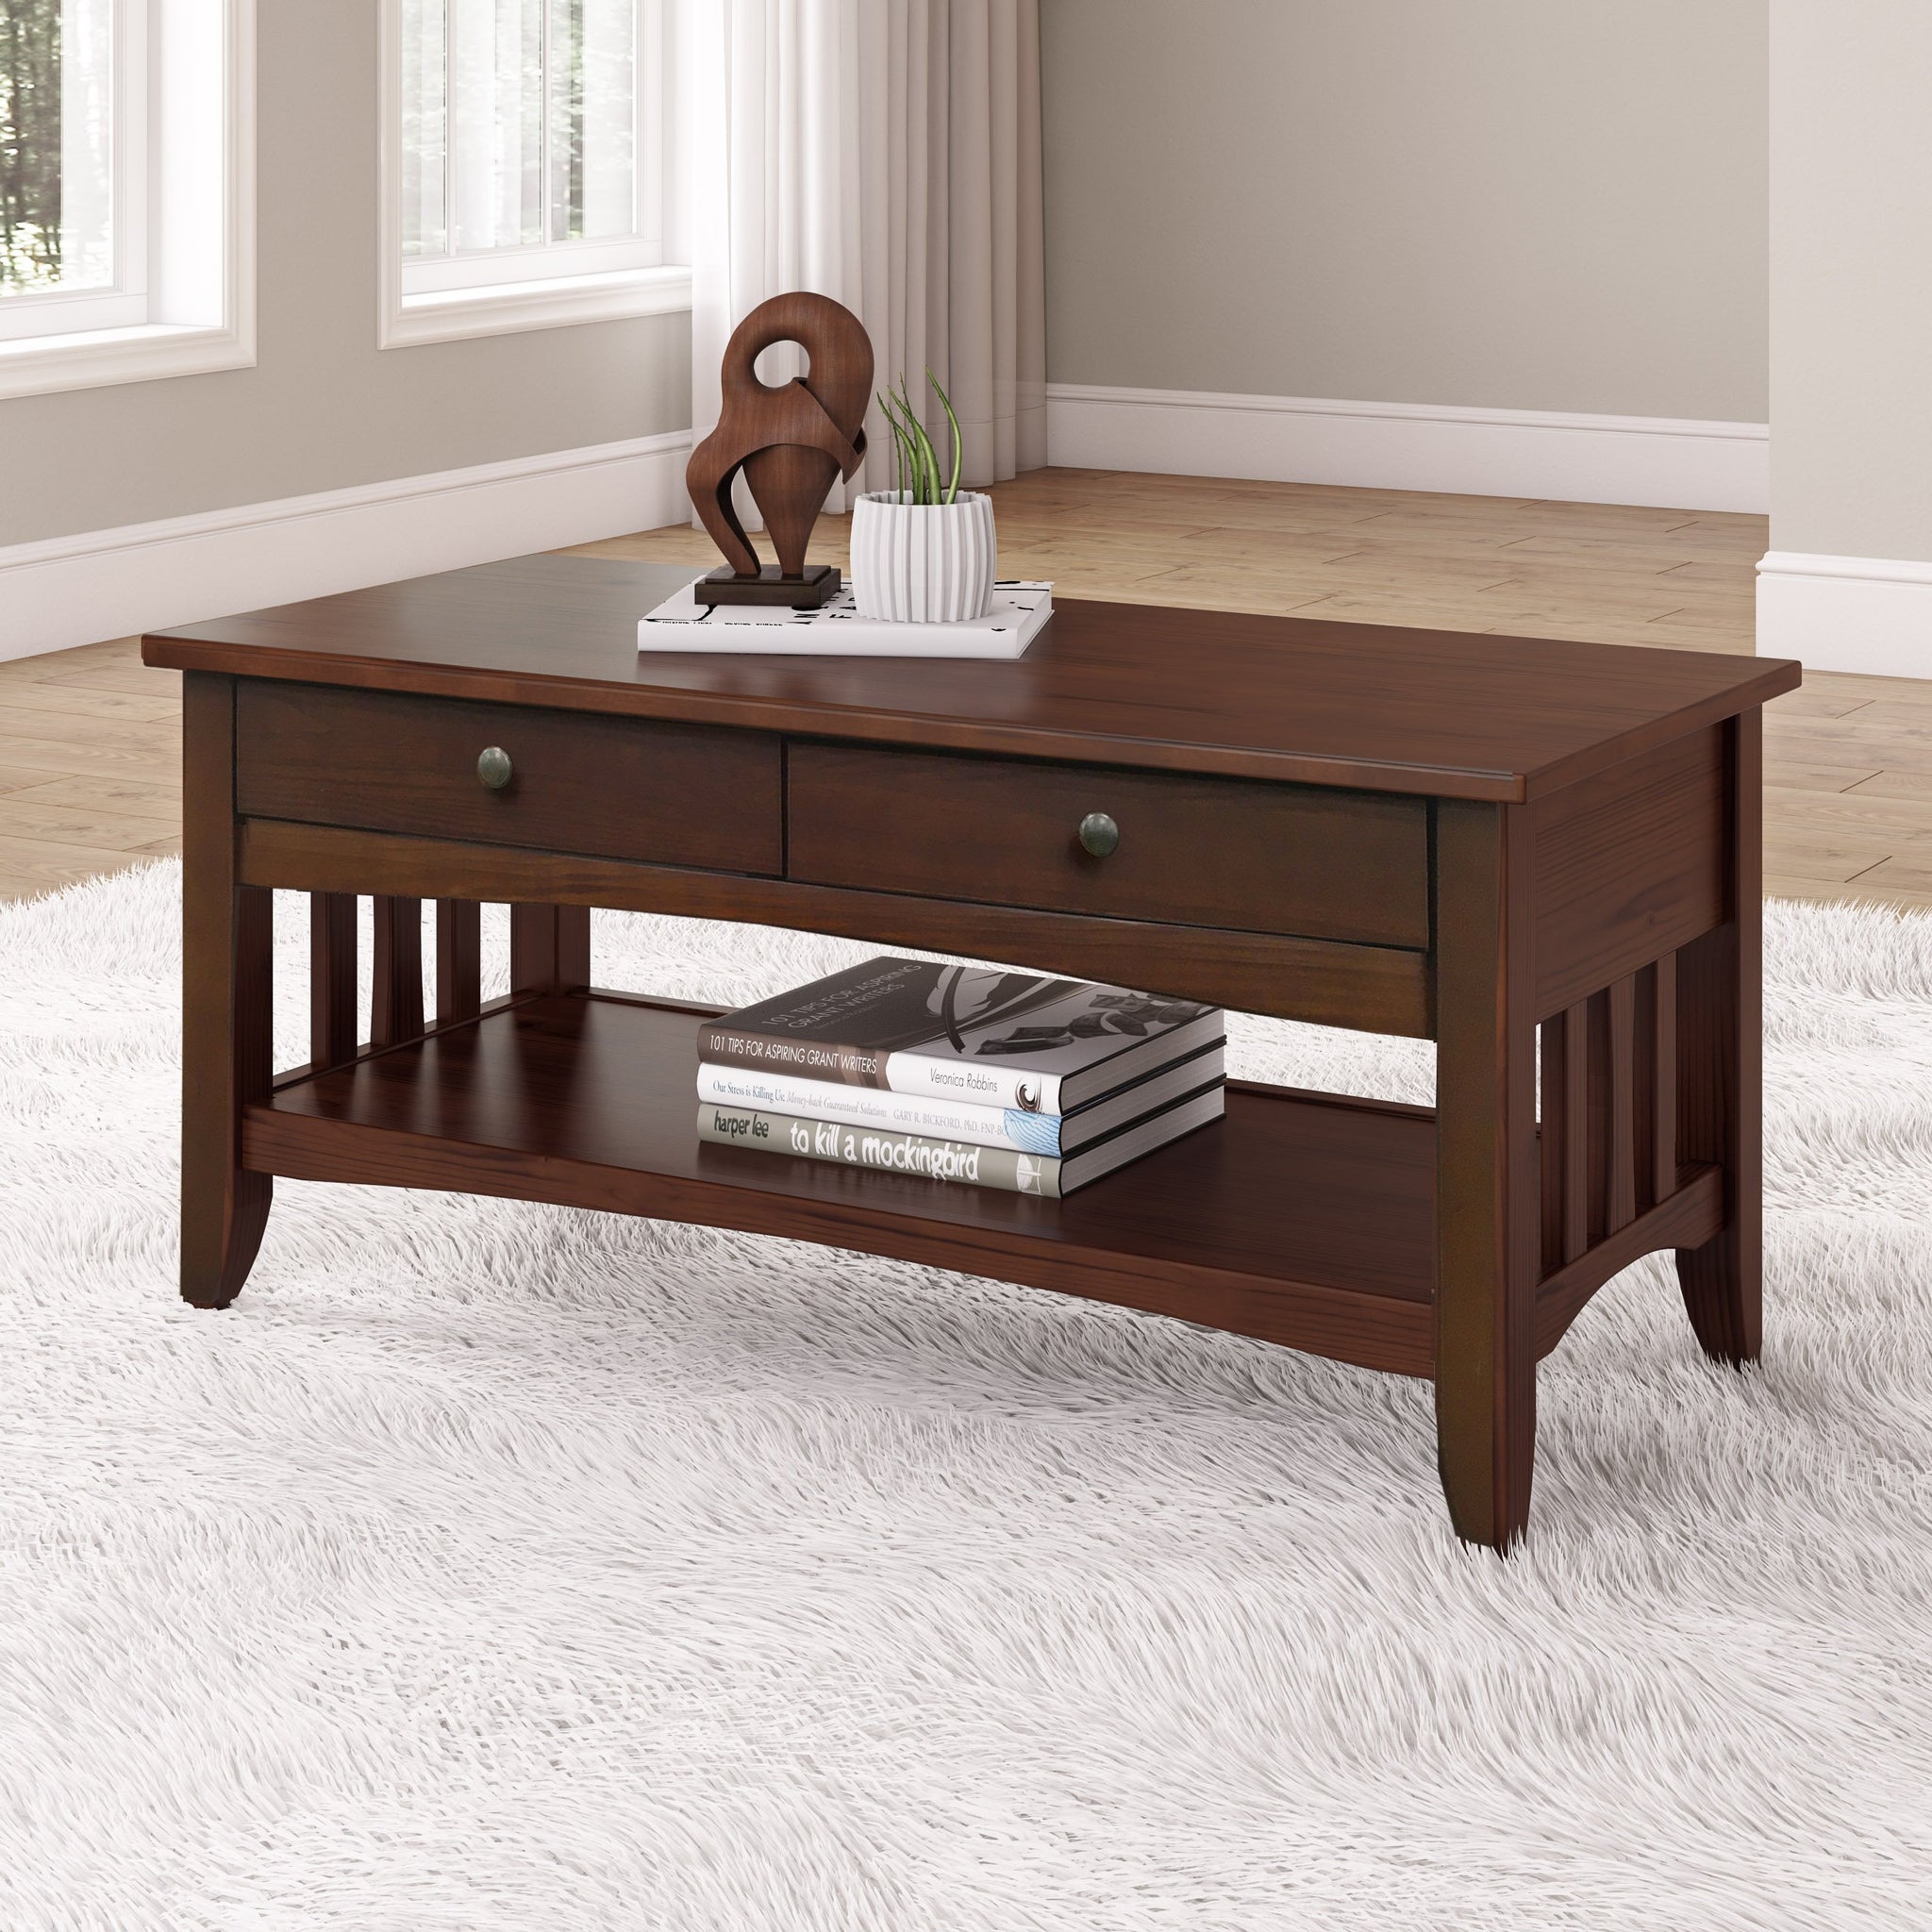 Coffee Table Clearance: Finding the Perfect Centerpiece for Your Living Room on a Budget